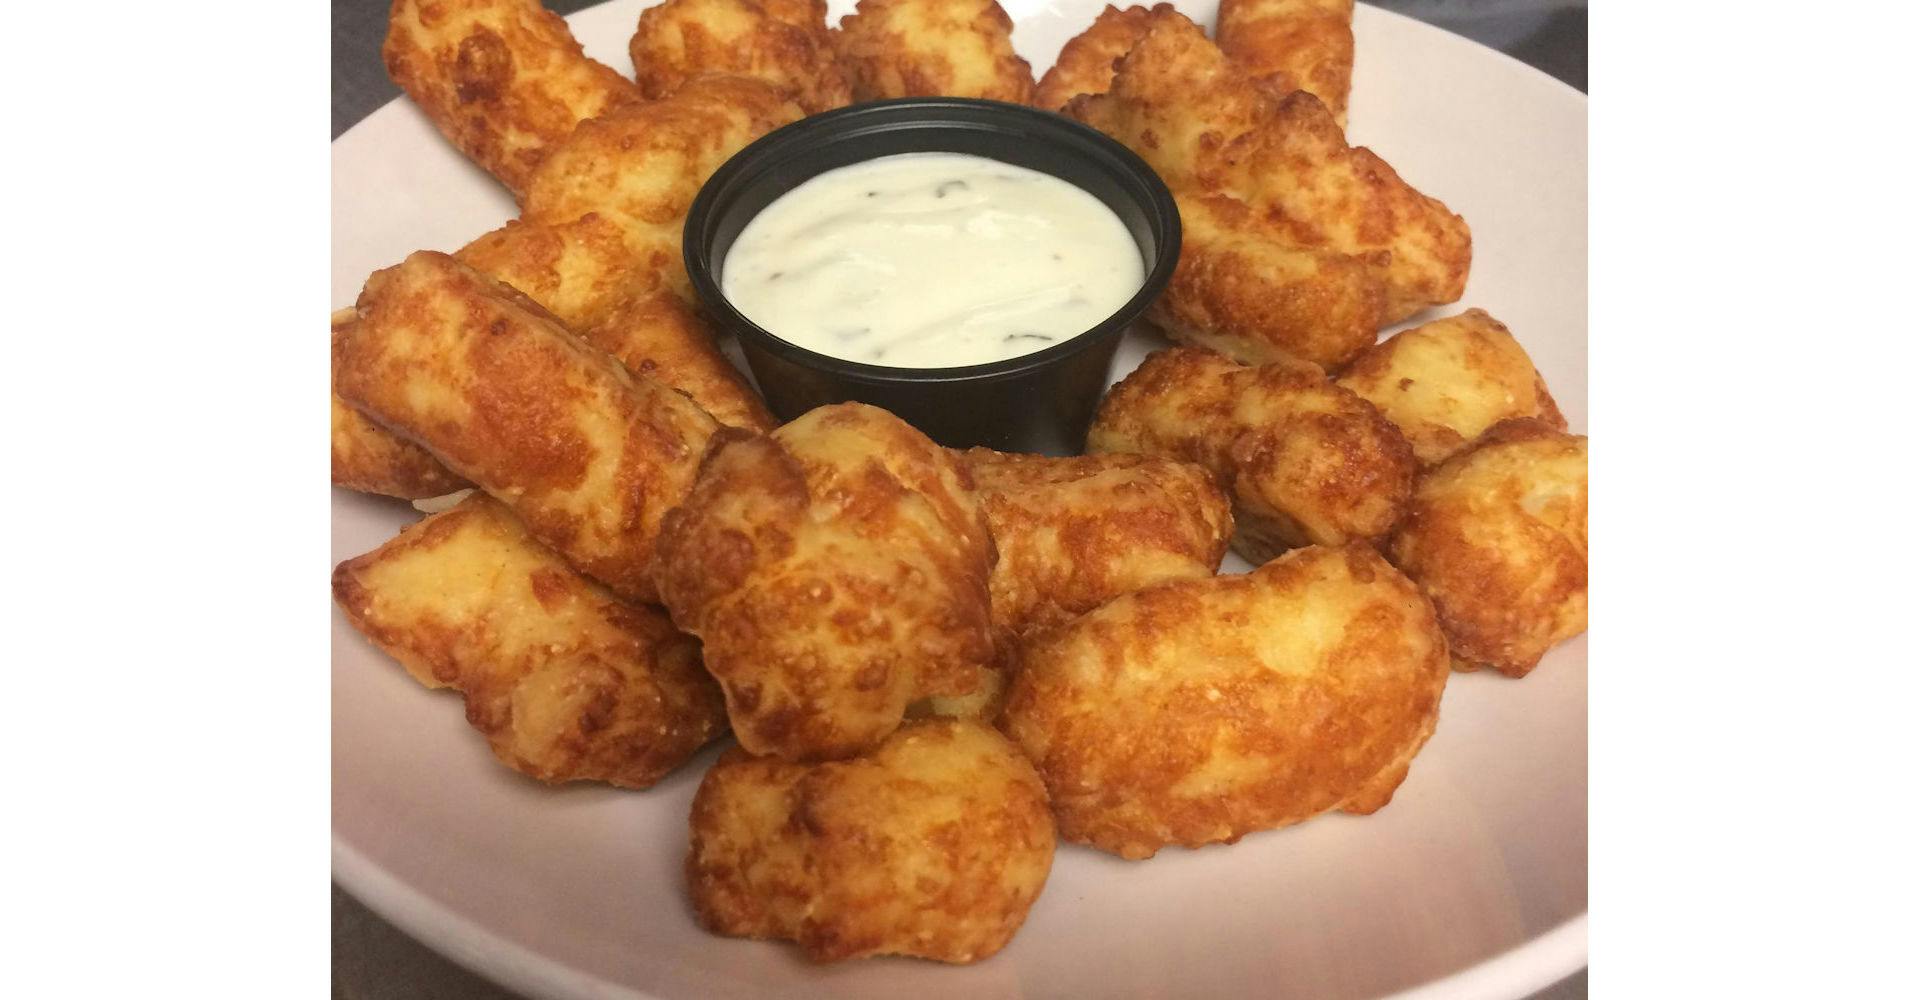 Best-In-The-State Cheese Curds from Grazies Italian Grill in Stevens Point, WI